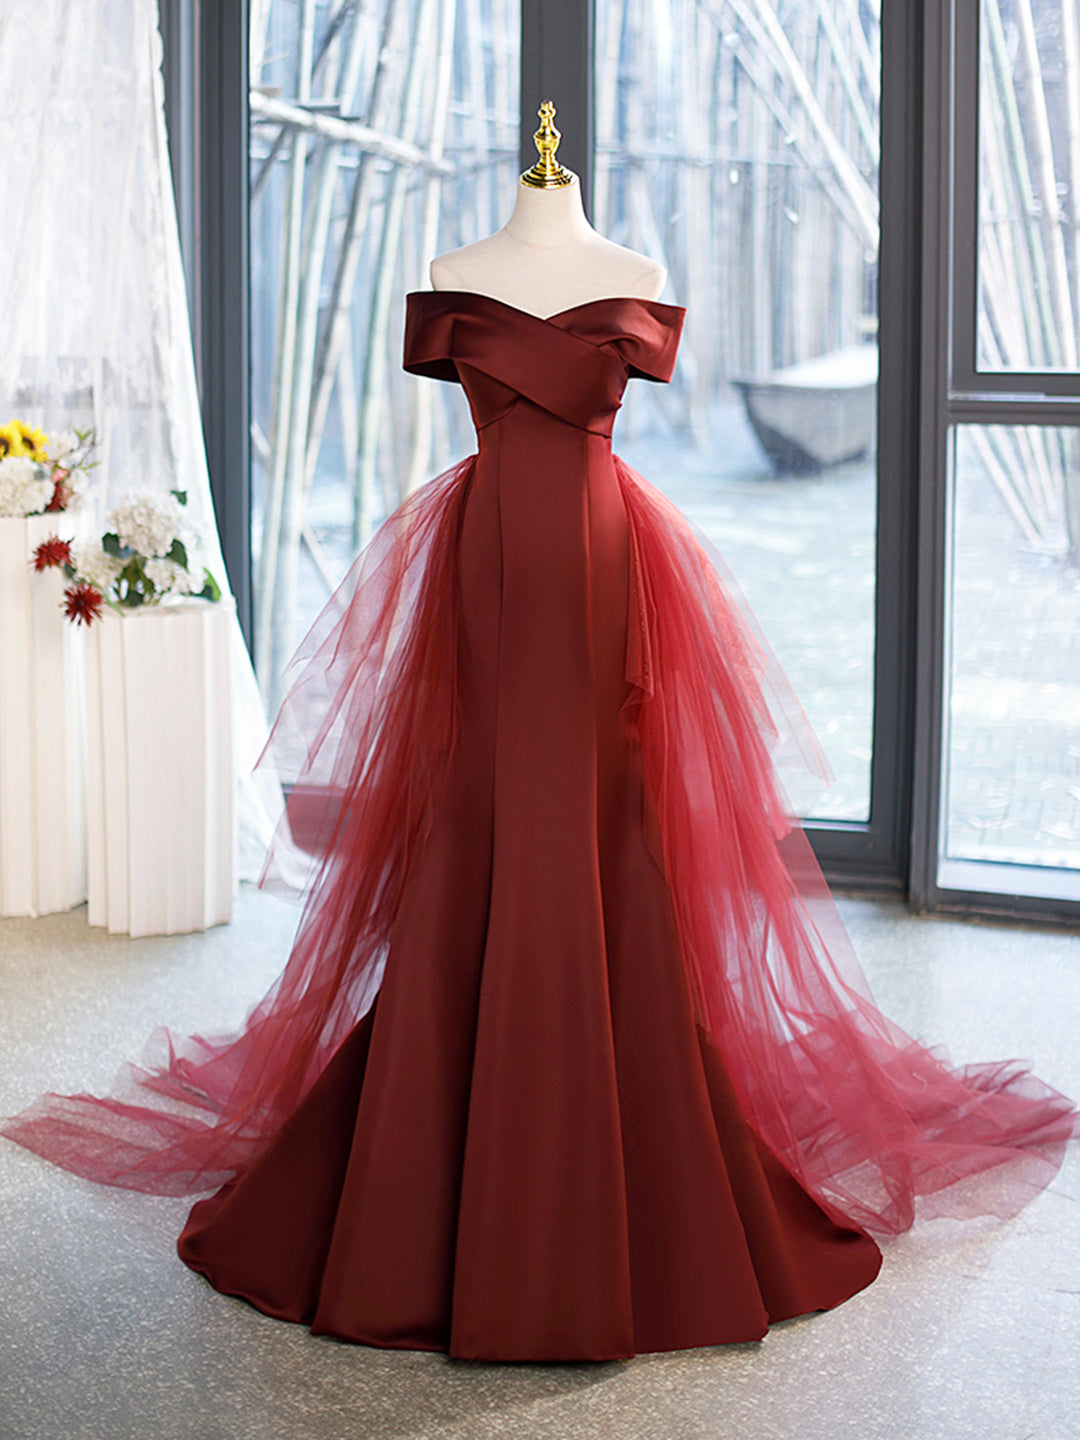 Mermaid V-Neck Satin Long Corset Prom Dress, Burgundy Off Shoulder Evening Dress with Bow outfit, Bridesmaid Dresses Inspiration